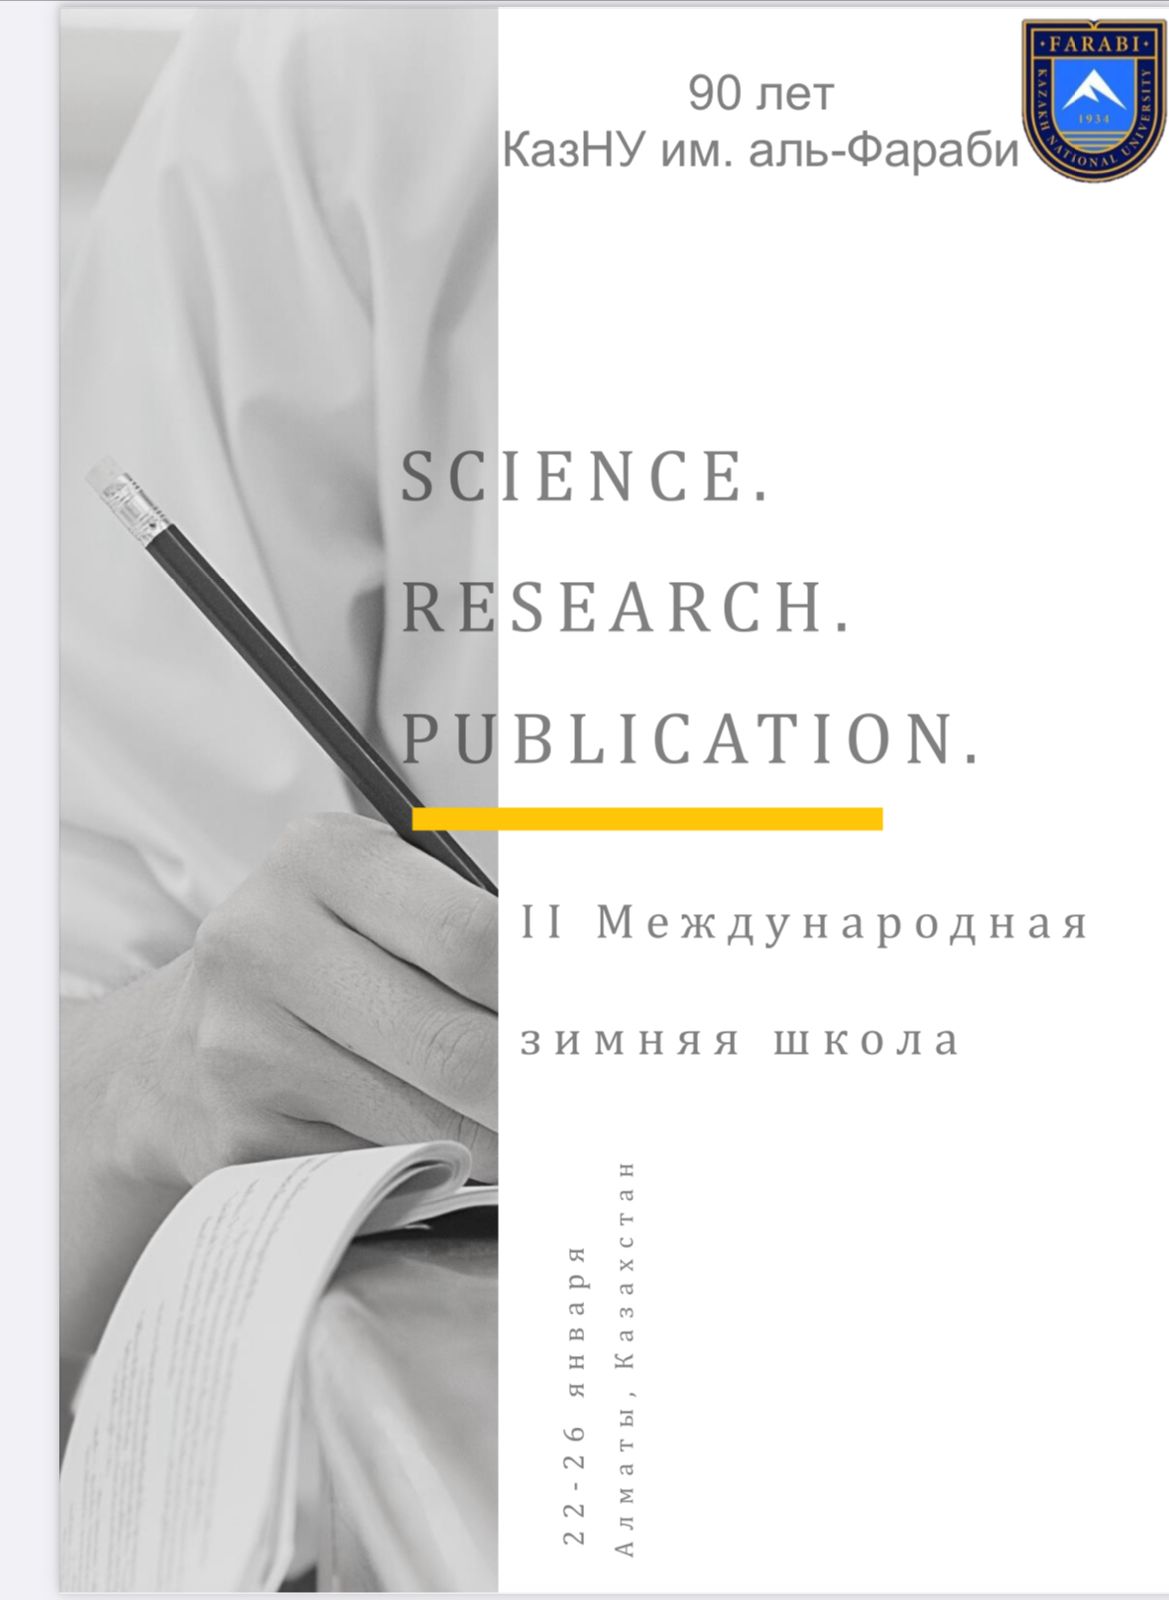 Зимняя школа «Science. Research. Publication»